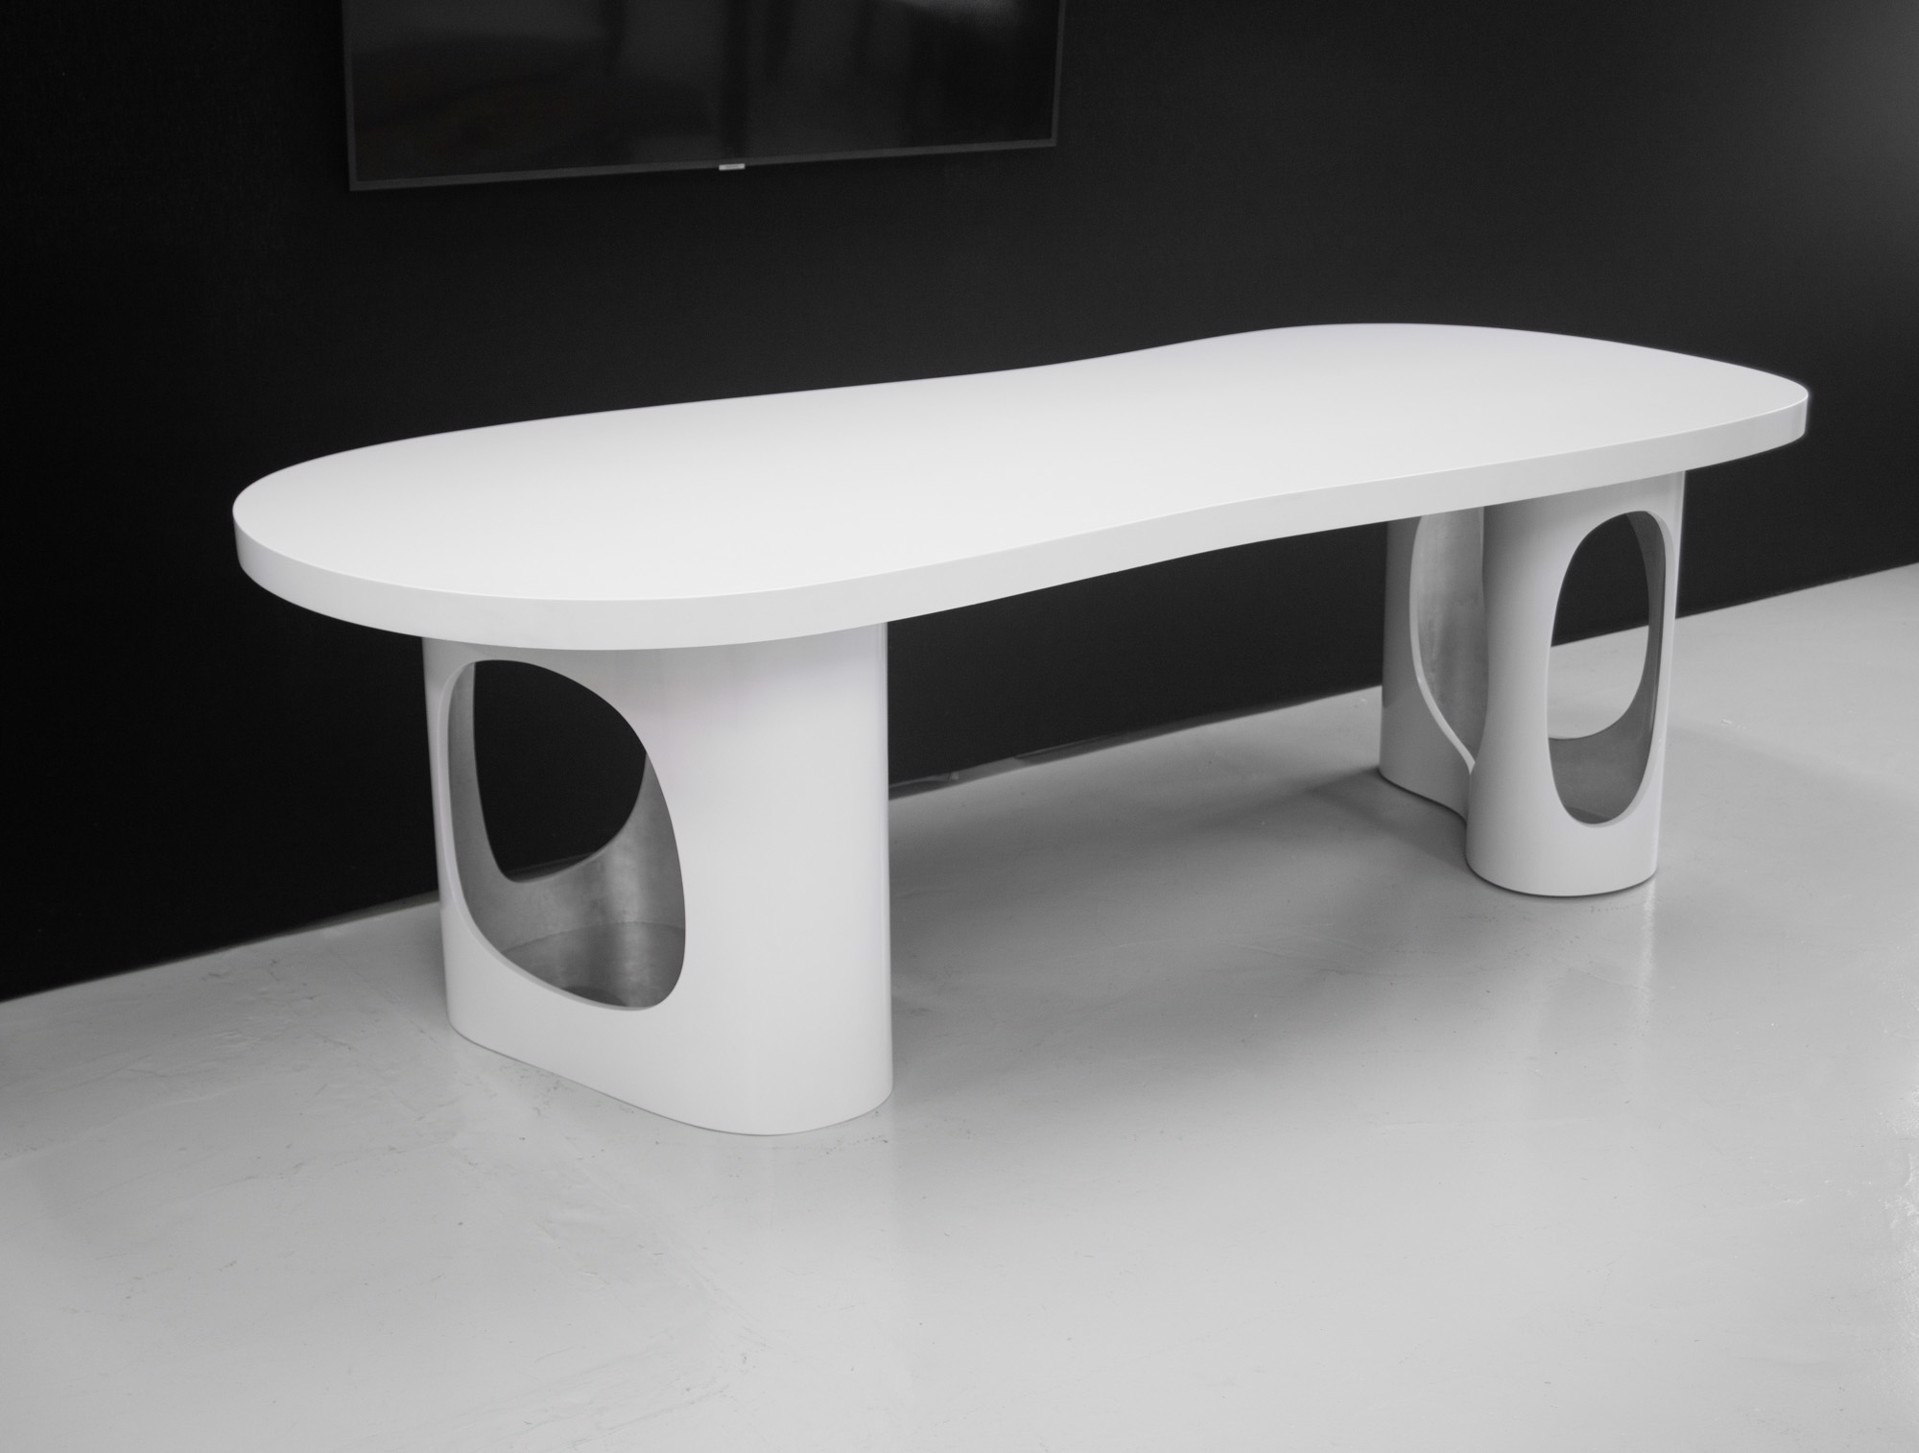 "Cloud" Desk or Dining table by Jacques Jarrige